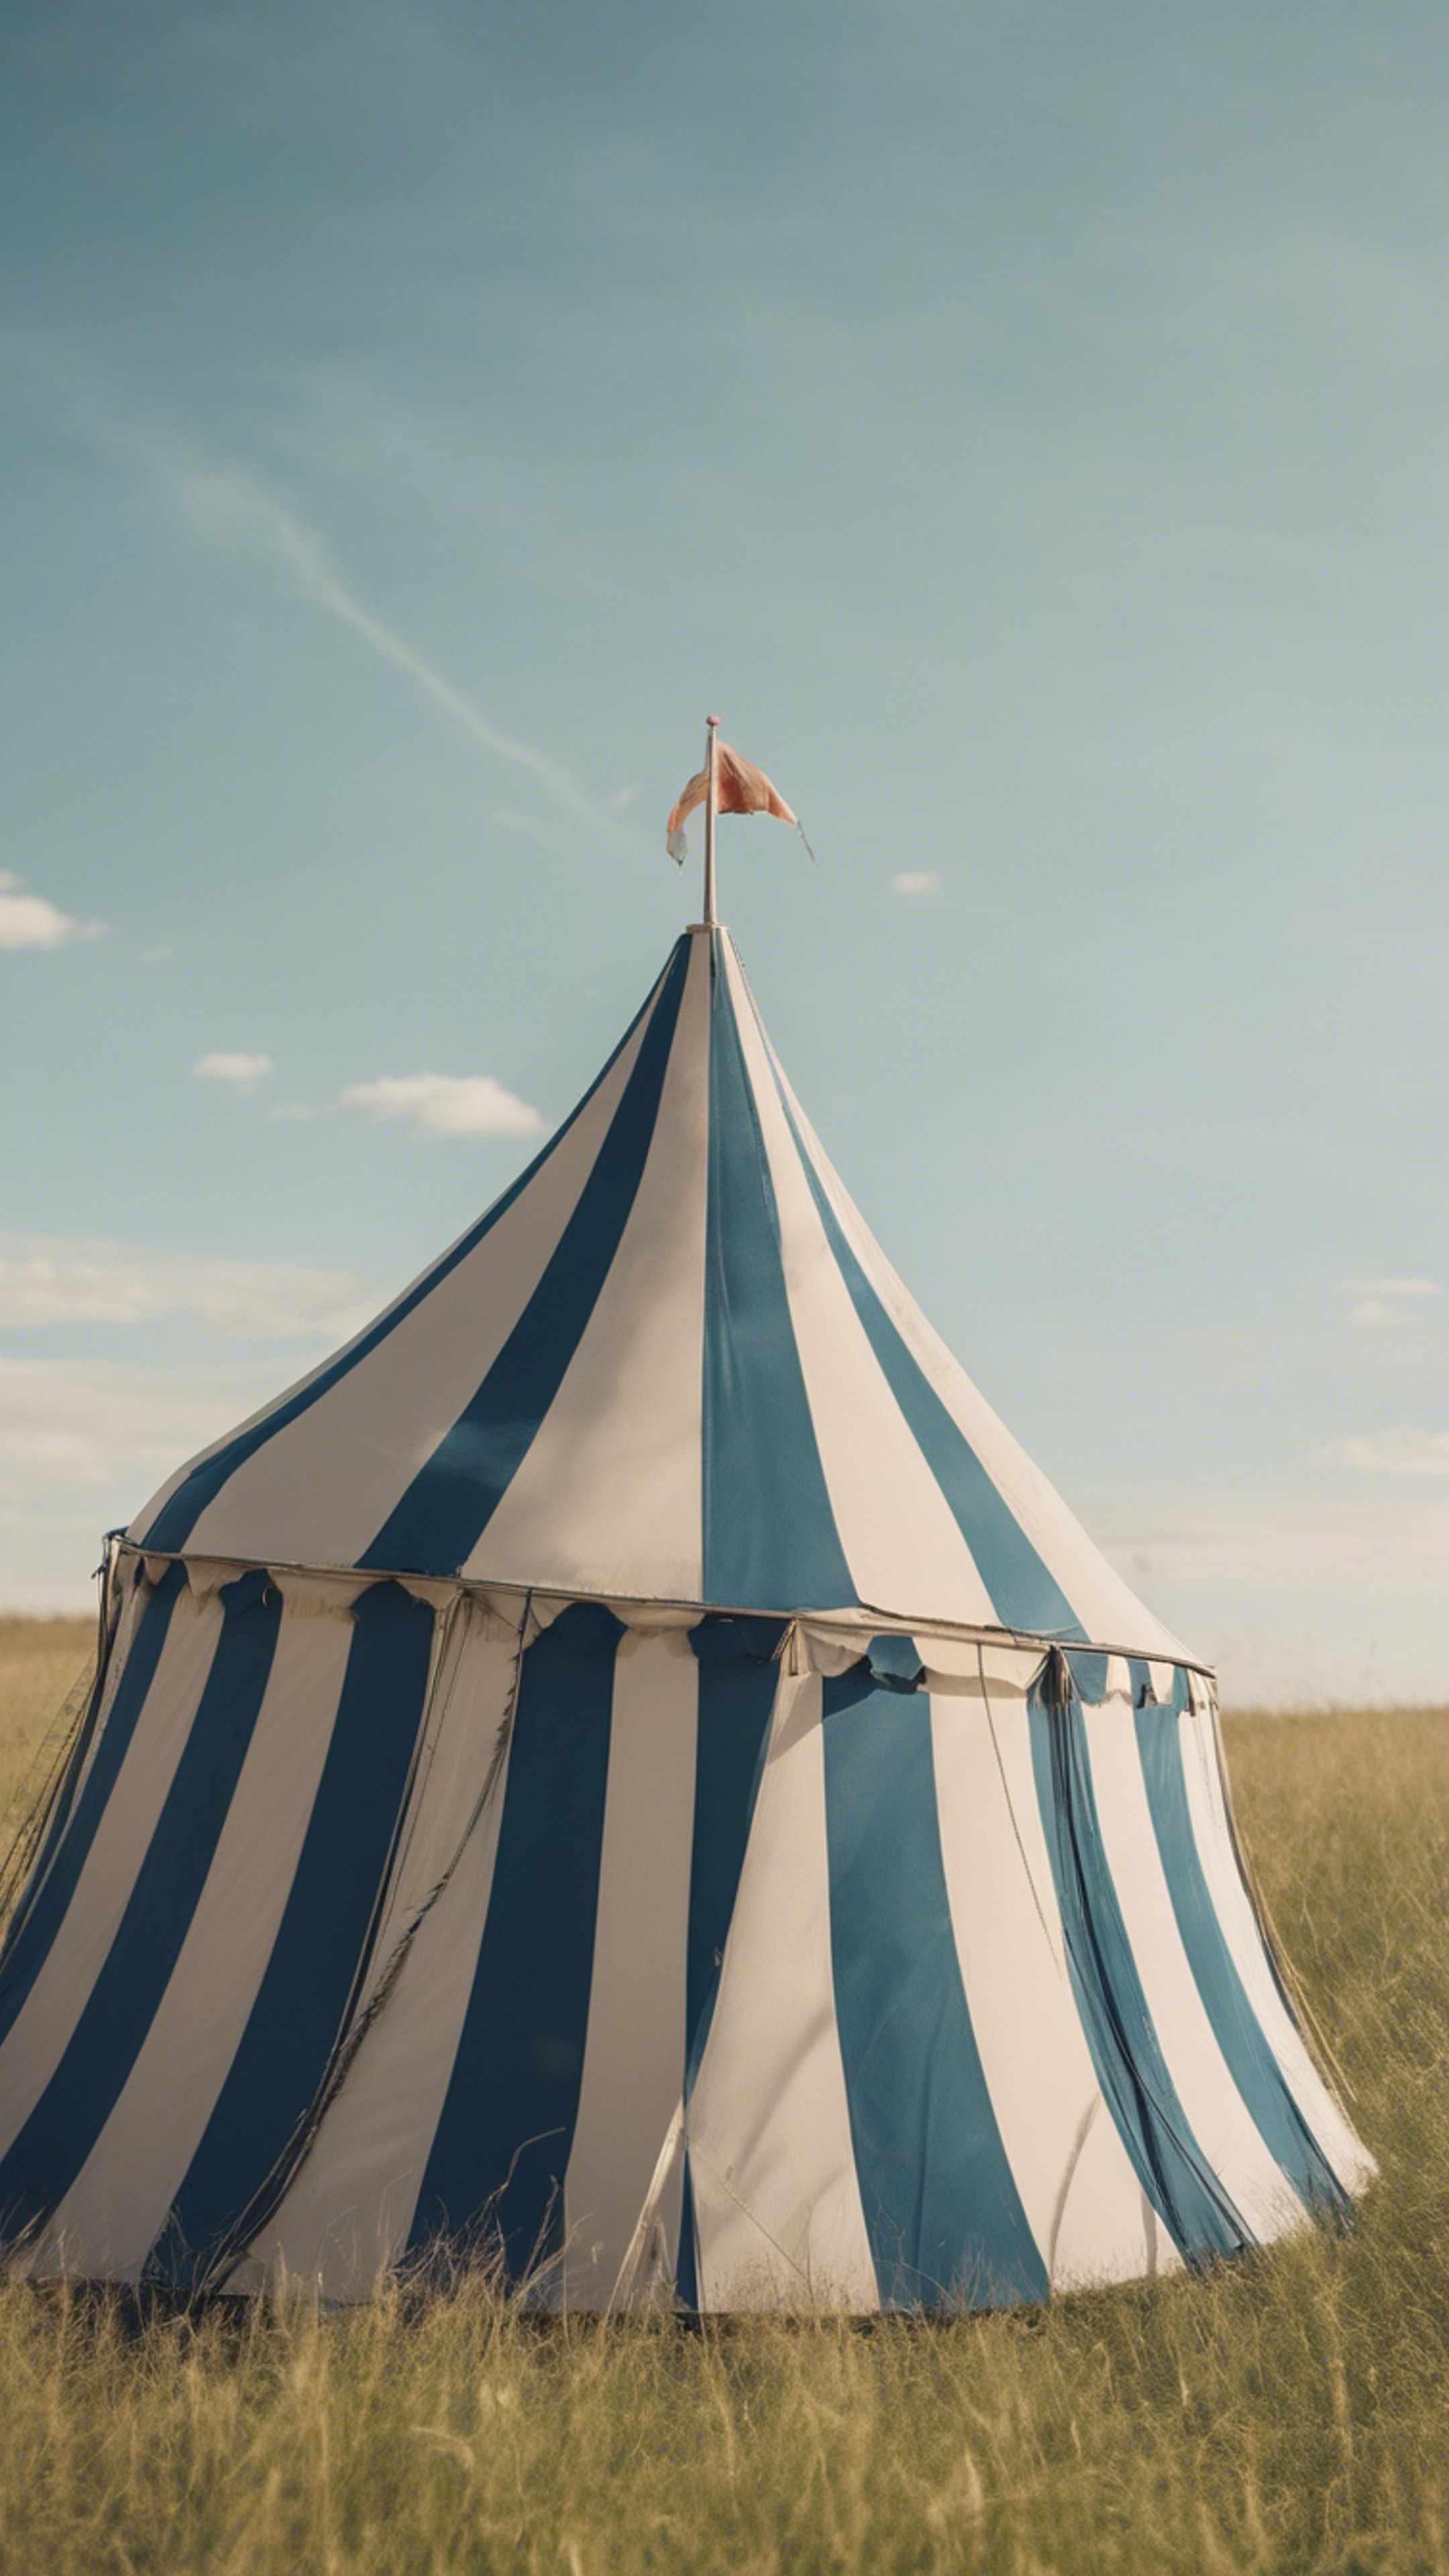 A vintage striped circus tent in a grassy field with a blue sky overhead. Tapeta[07d58b74cbfe41aa8350]